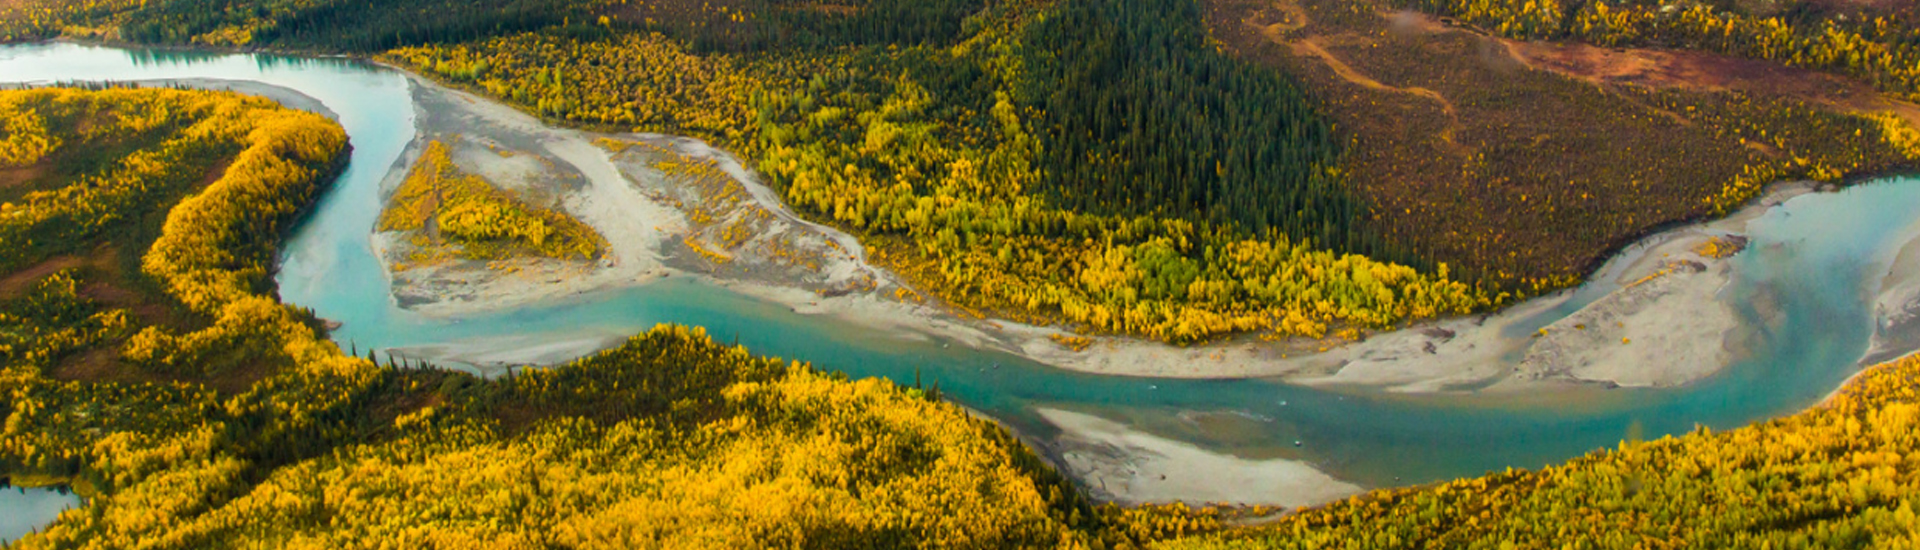 arial view of river in autumn